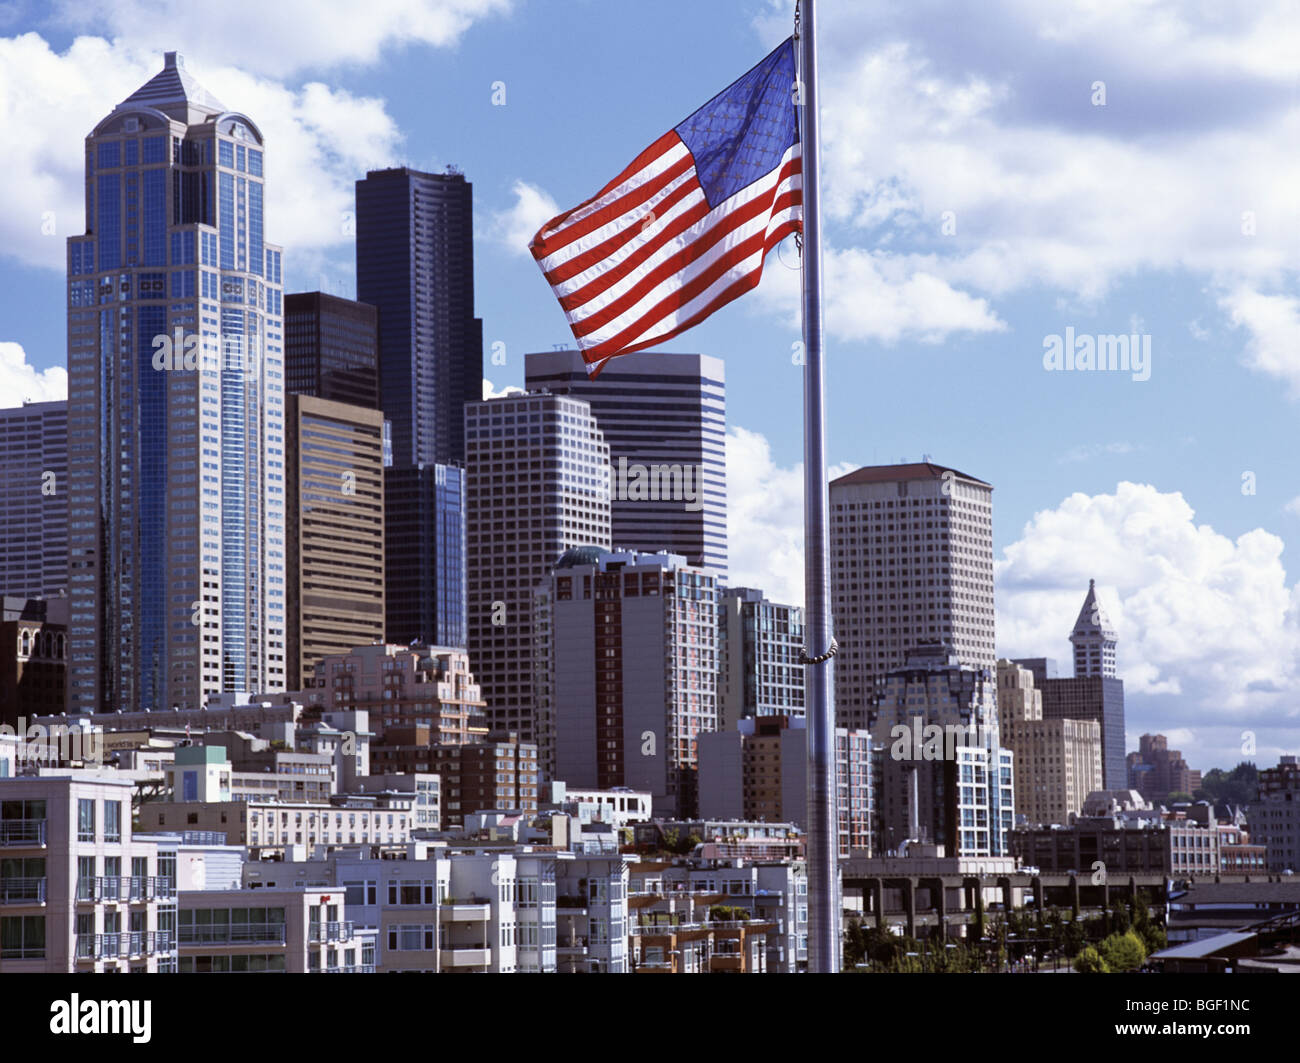 Downtown skyline with the Stars and Stripes flag in foreground and the city buildings beyond. Seattle, Washington State, USA. Stock Photo